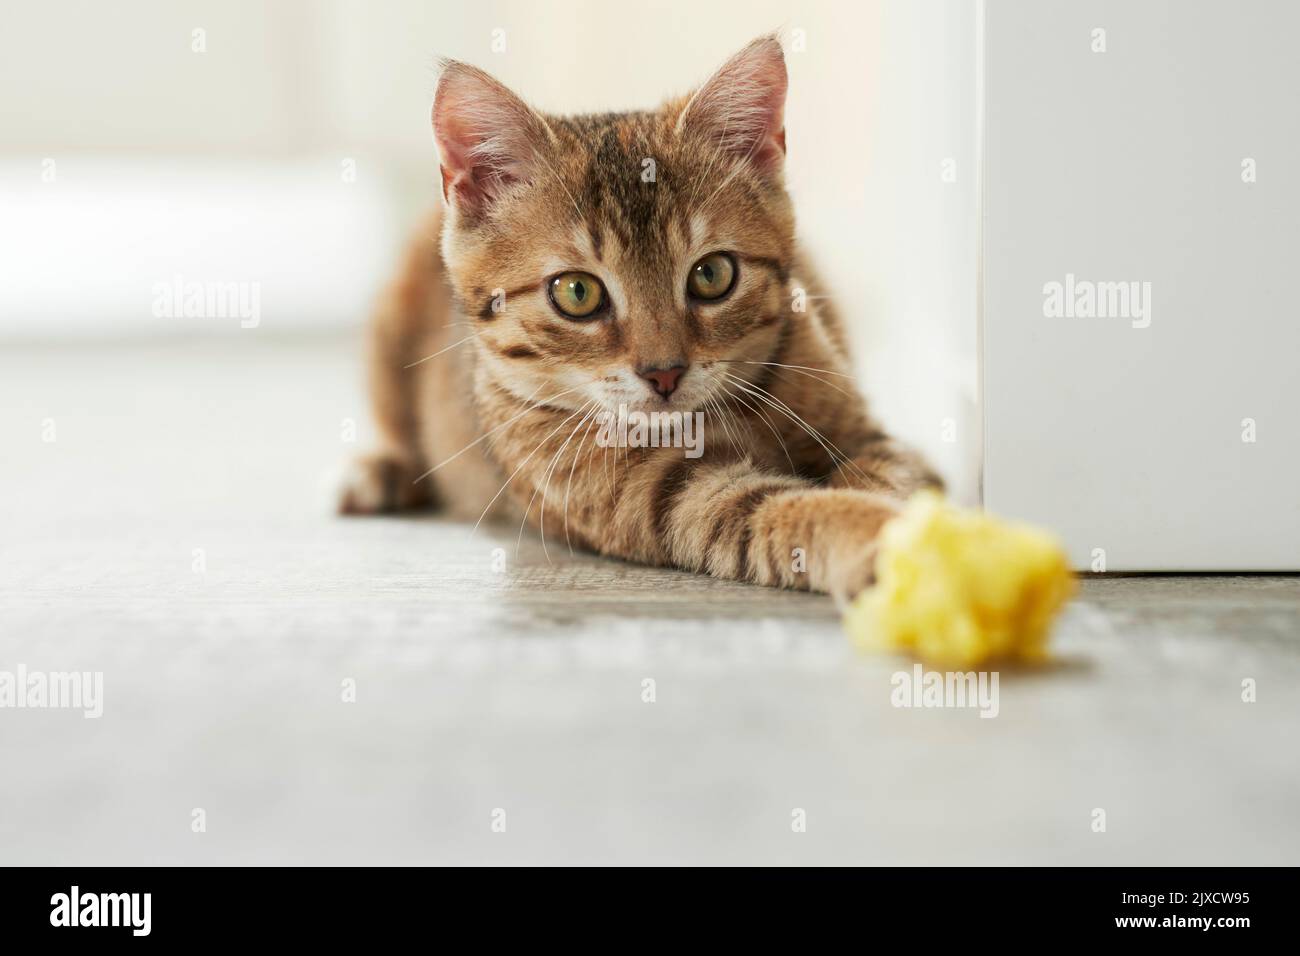 Domestic cat. A tabby kitten playing with crumpled paper. Germany Stock Photo